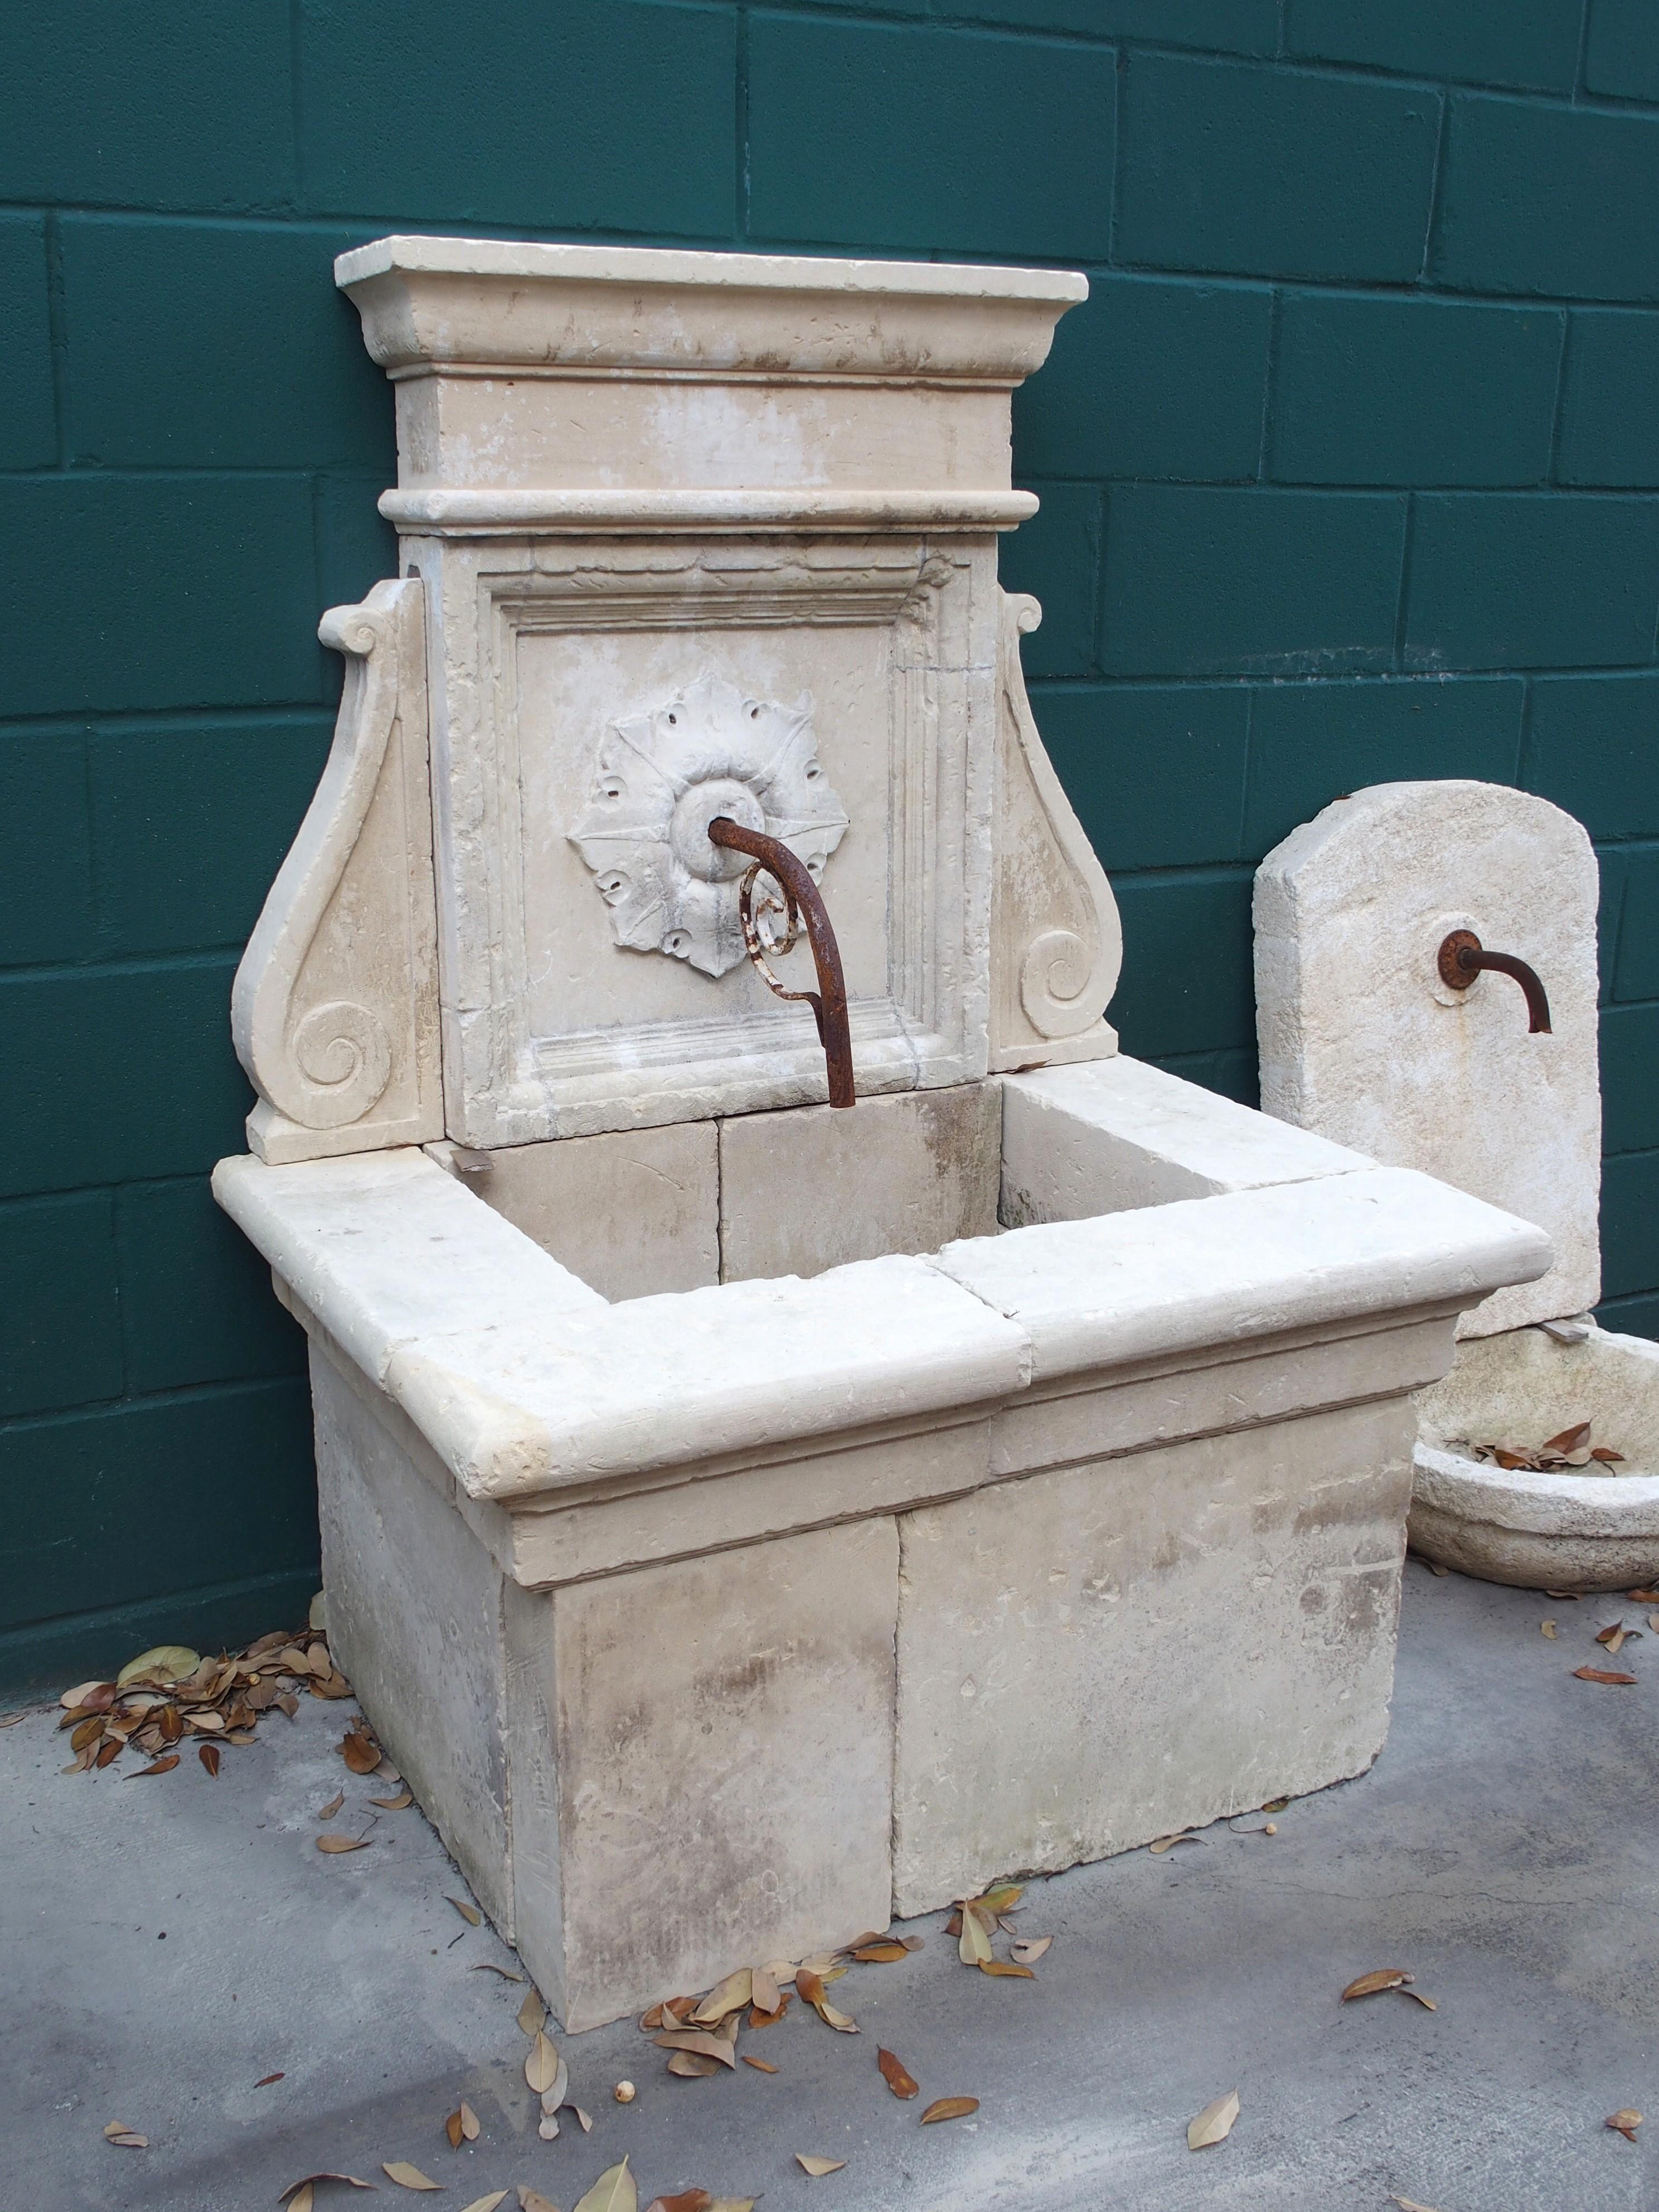 Consisting of 14 pieces of hand-carved limestone, this small wall fountain was produced in Lecce, in Southern Italy. The top entablature features a thick ogee molding beneath the cornice and a quarter-round protrusion near the base, above a square